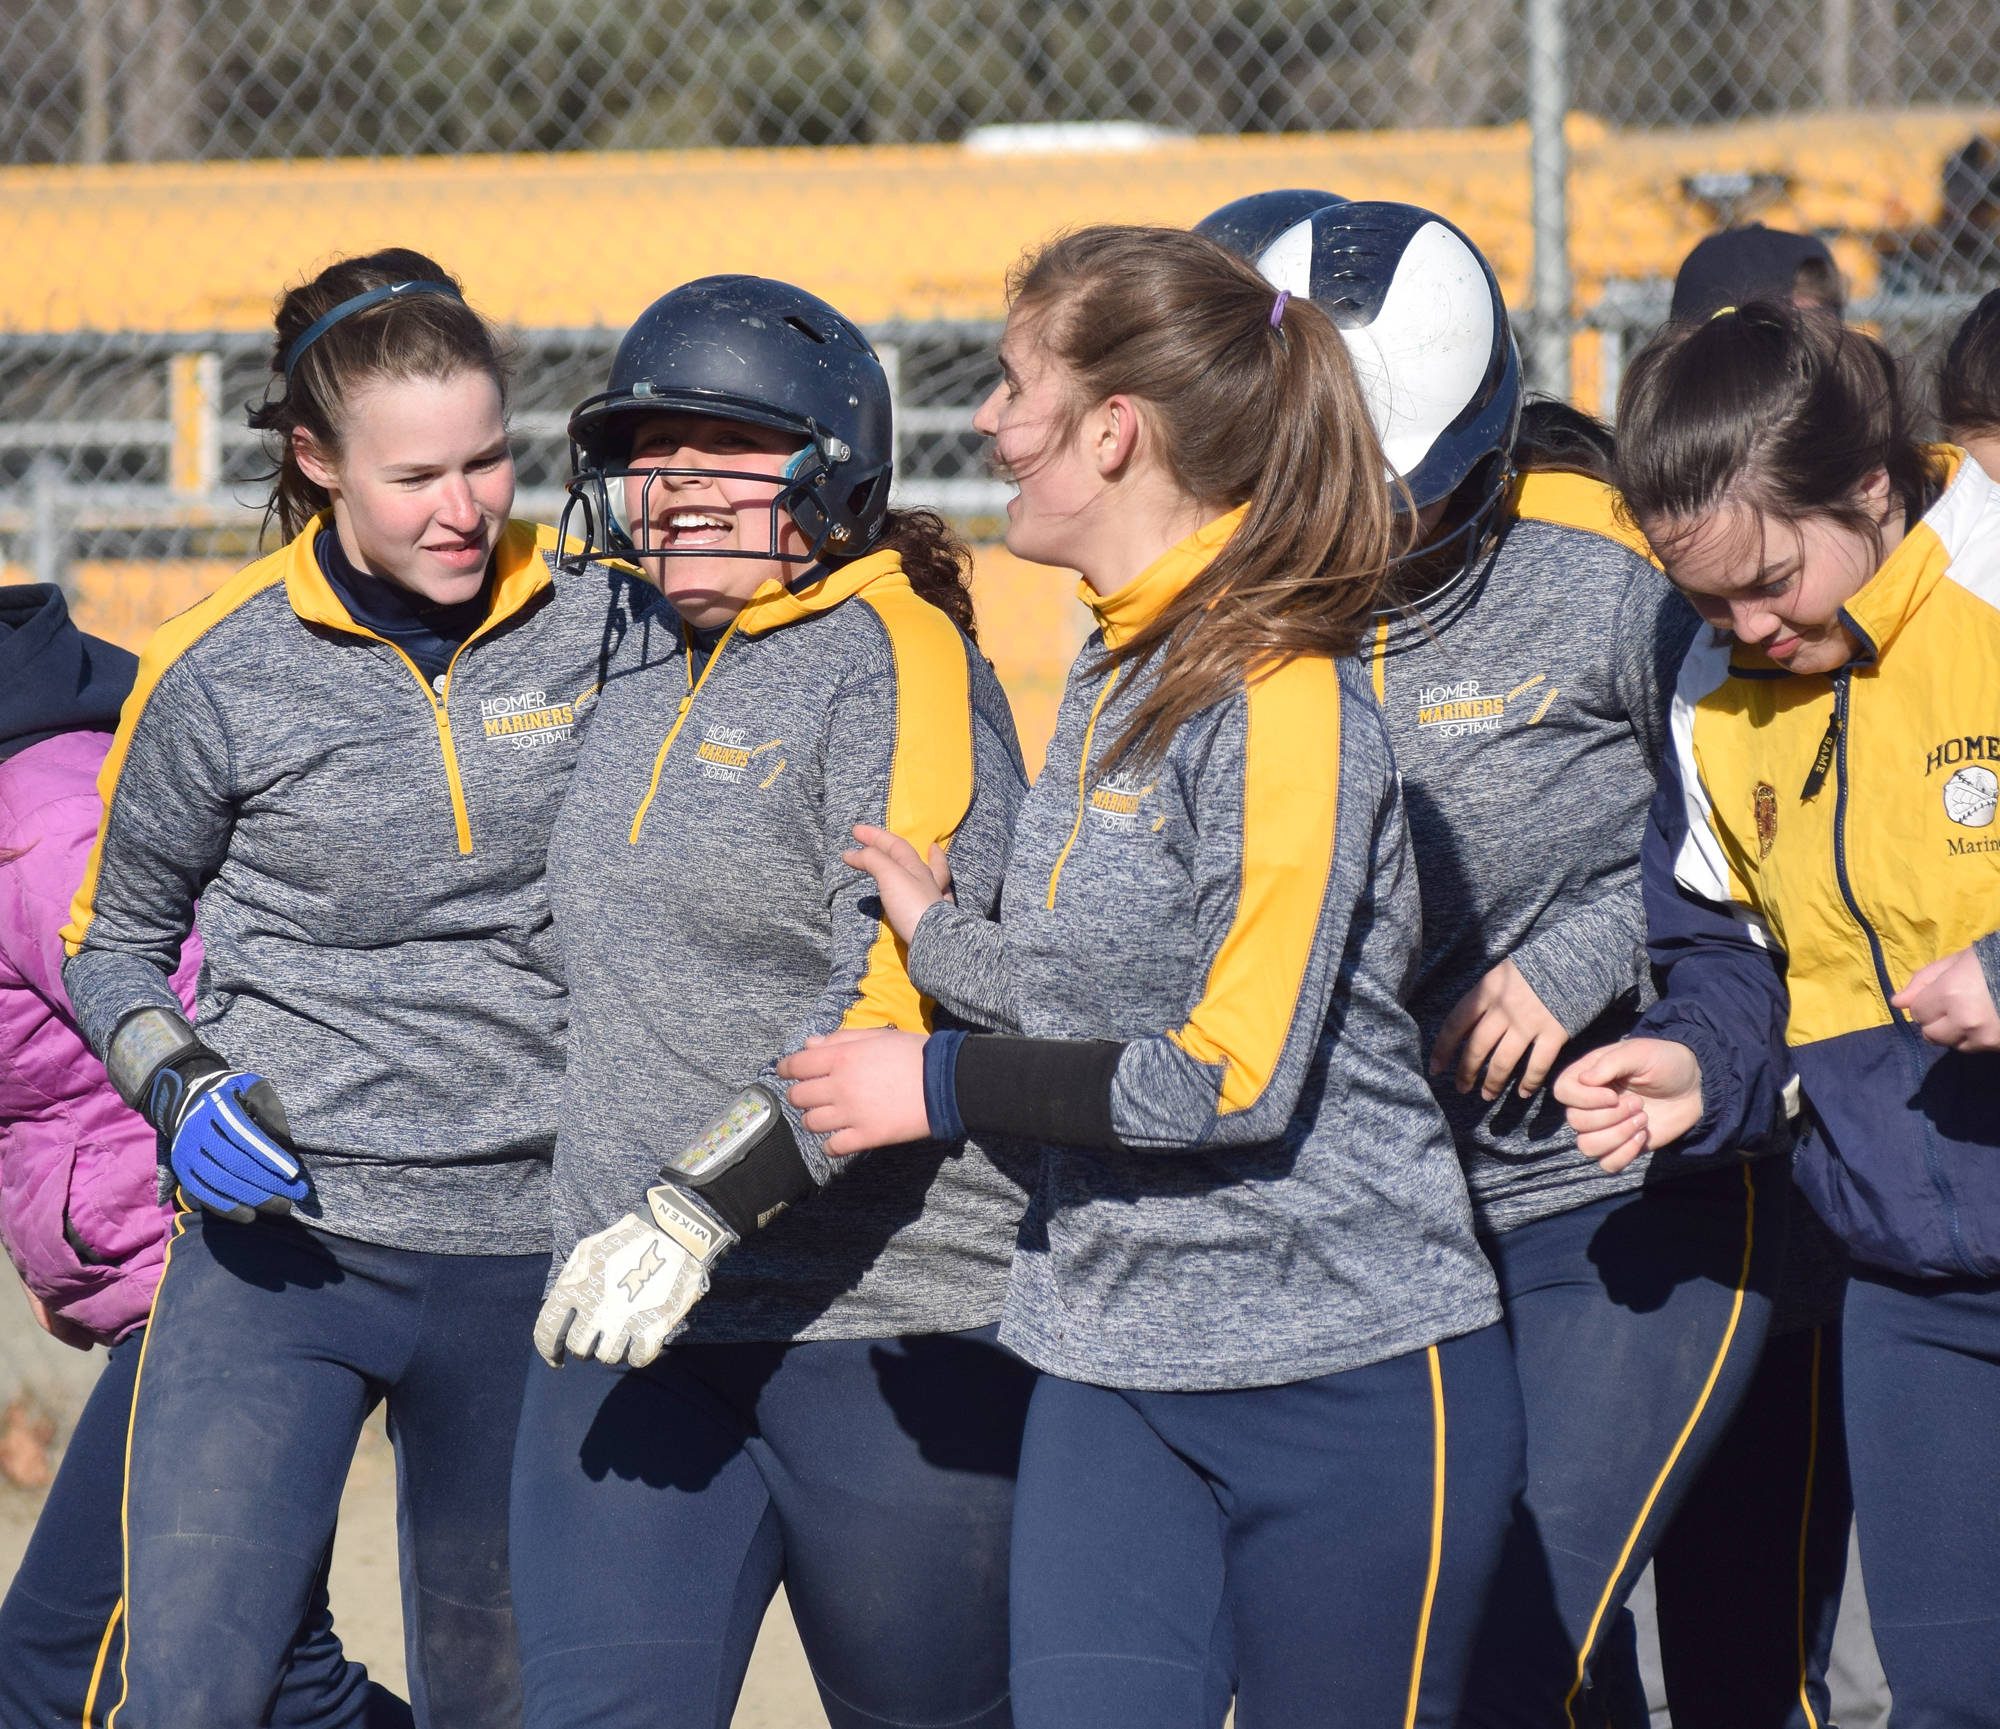 Photo by Joey Klecka/Peninsula Clarion Homer junior Brianna Hetrick (second from left) celebrates with her teammates after touching home plate following a home run Tuesday evening at the Soldotna Little League fields.